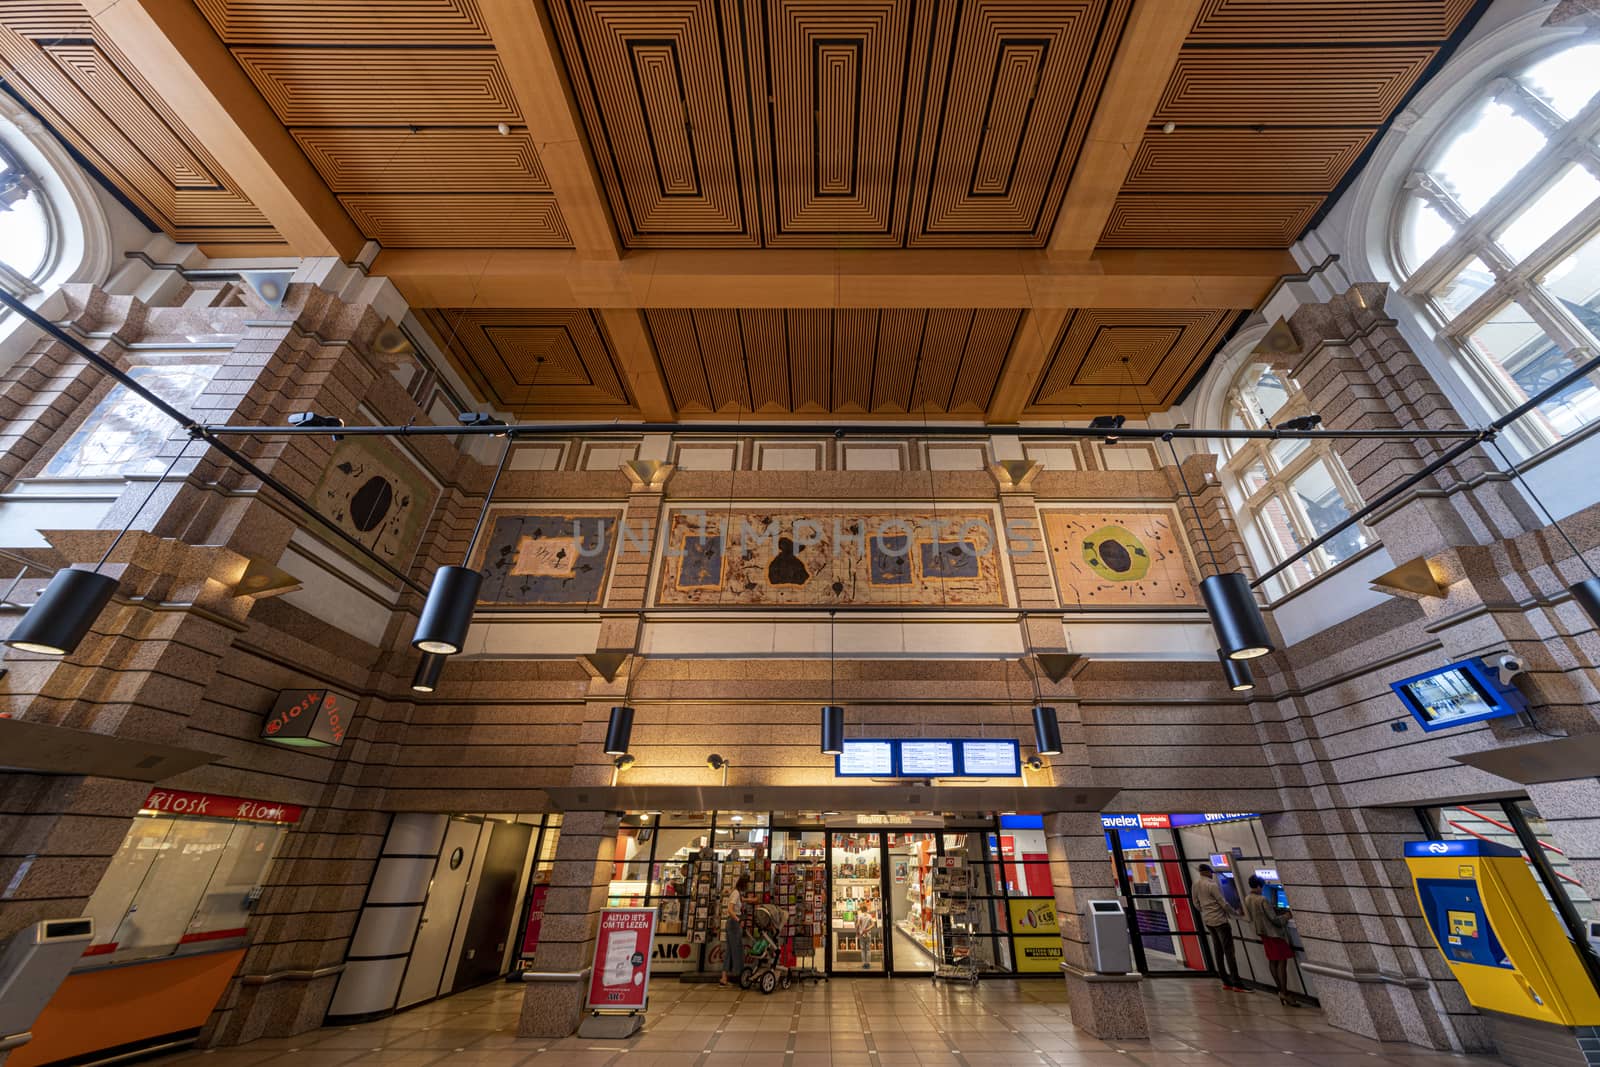 THE HAGUE, 10 June 2019 - Entrance and ceiling of the 'art deco' style of Den Haag train station